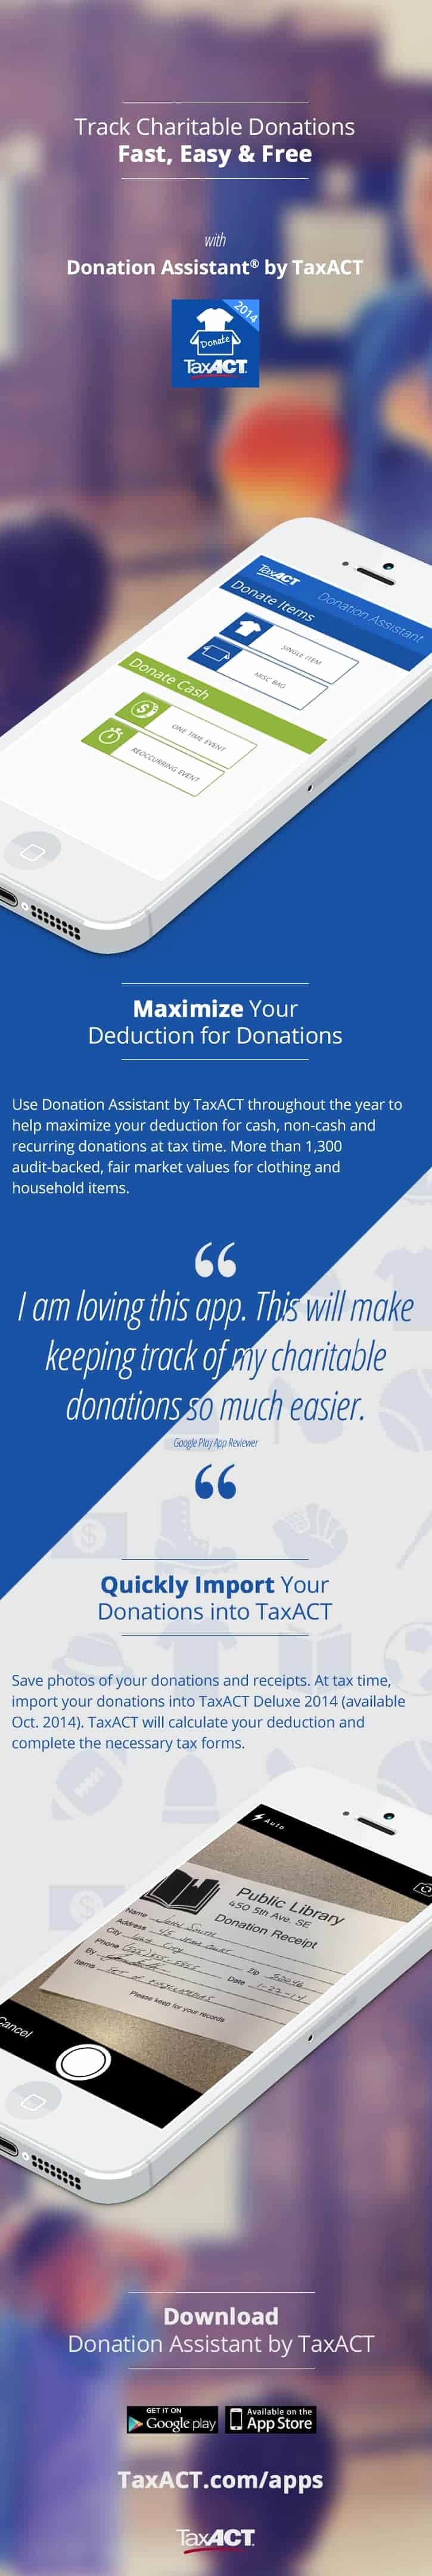 Keep Track Of Charitable Donations Luxury 97 Itsdeductible Mobile Track Your Donations Explore the